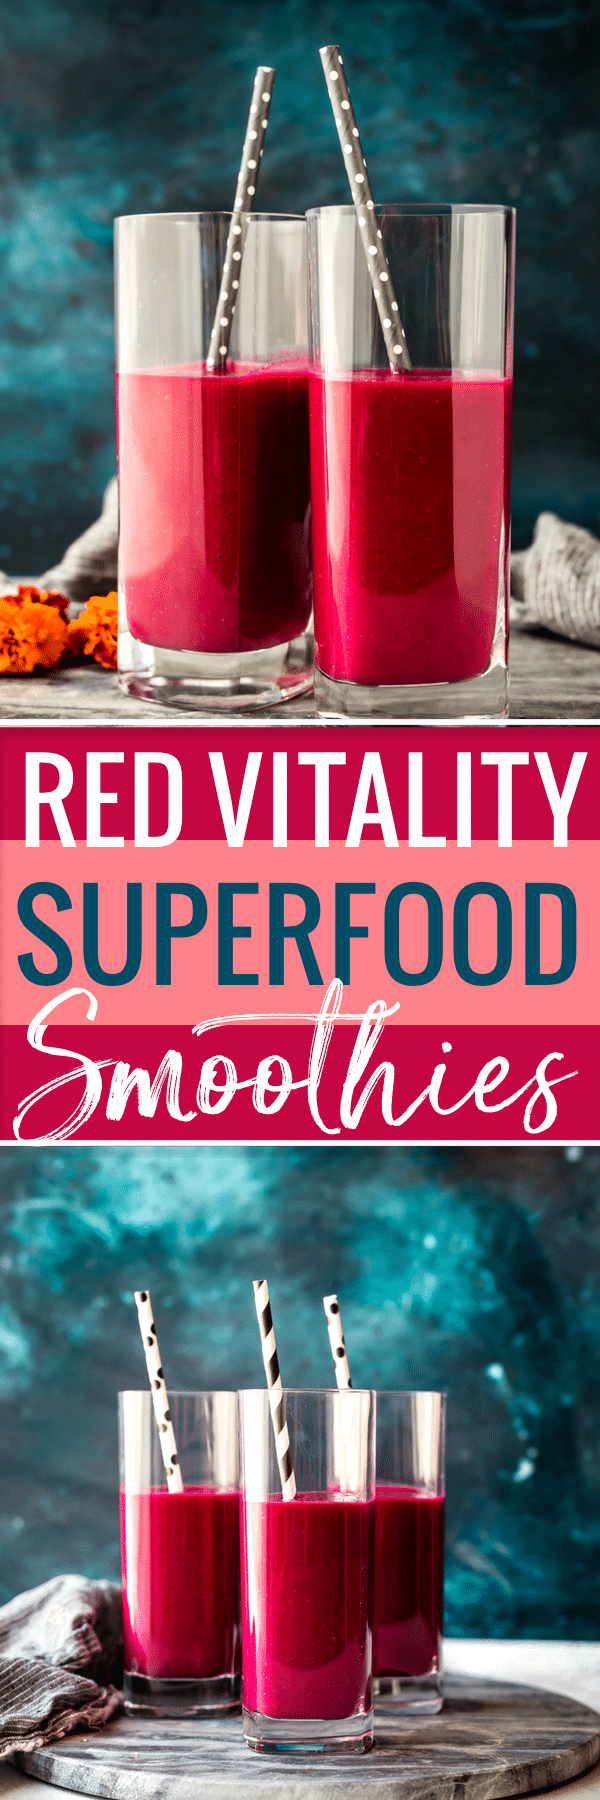 RED VITALITY SUPERFOOD SMOOTHIES! Packed with nutrient dense ingredients to boost energy and overall Health! Made with creamy almond coconut milk, tropical fruits, and hidden veggies. Paleo, and vegan friendly! #silksmoothies